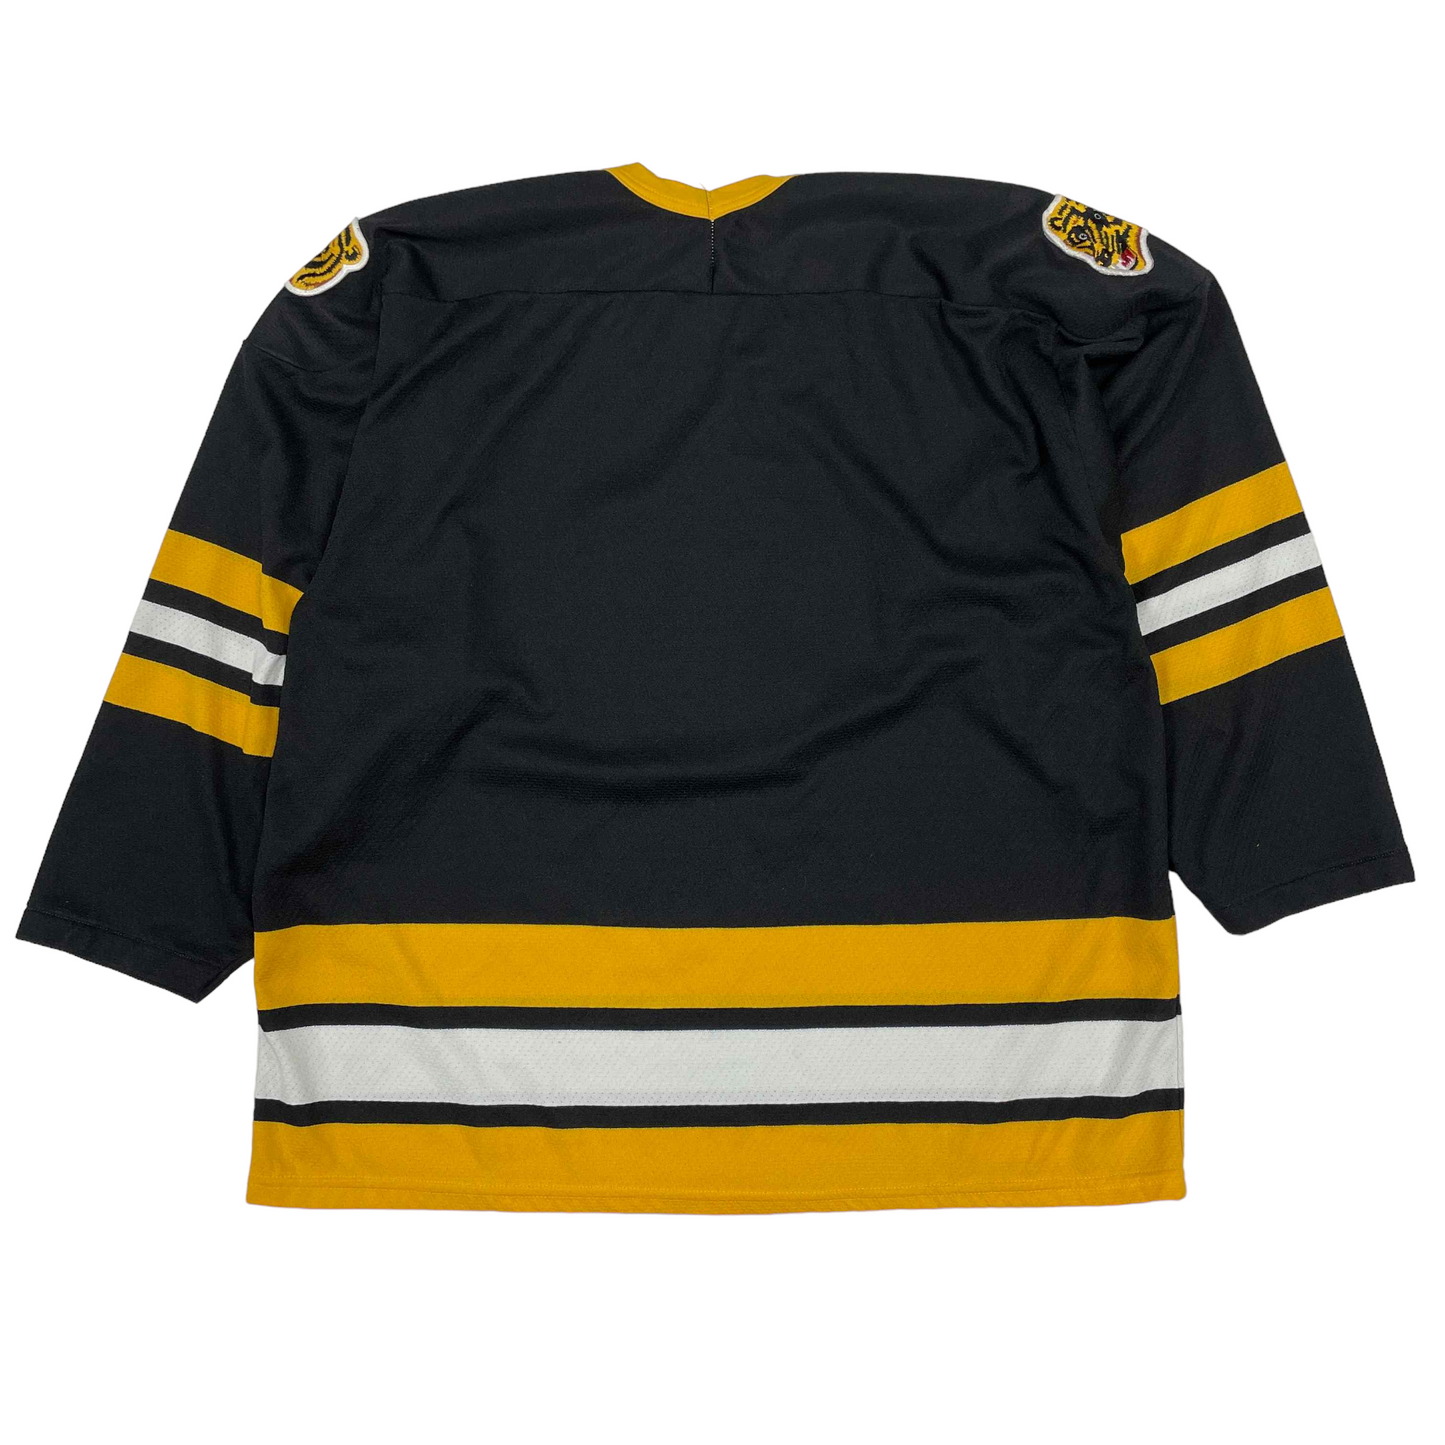 Boston Bruins NFL Jersey - XL – The Vintage Store